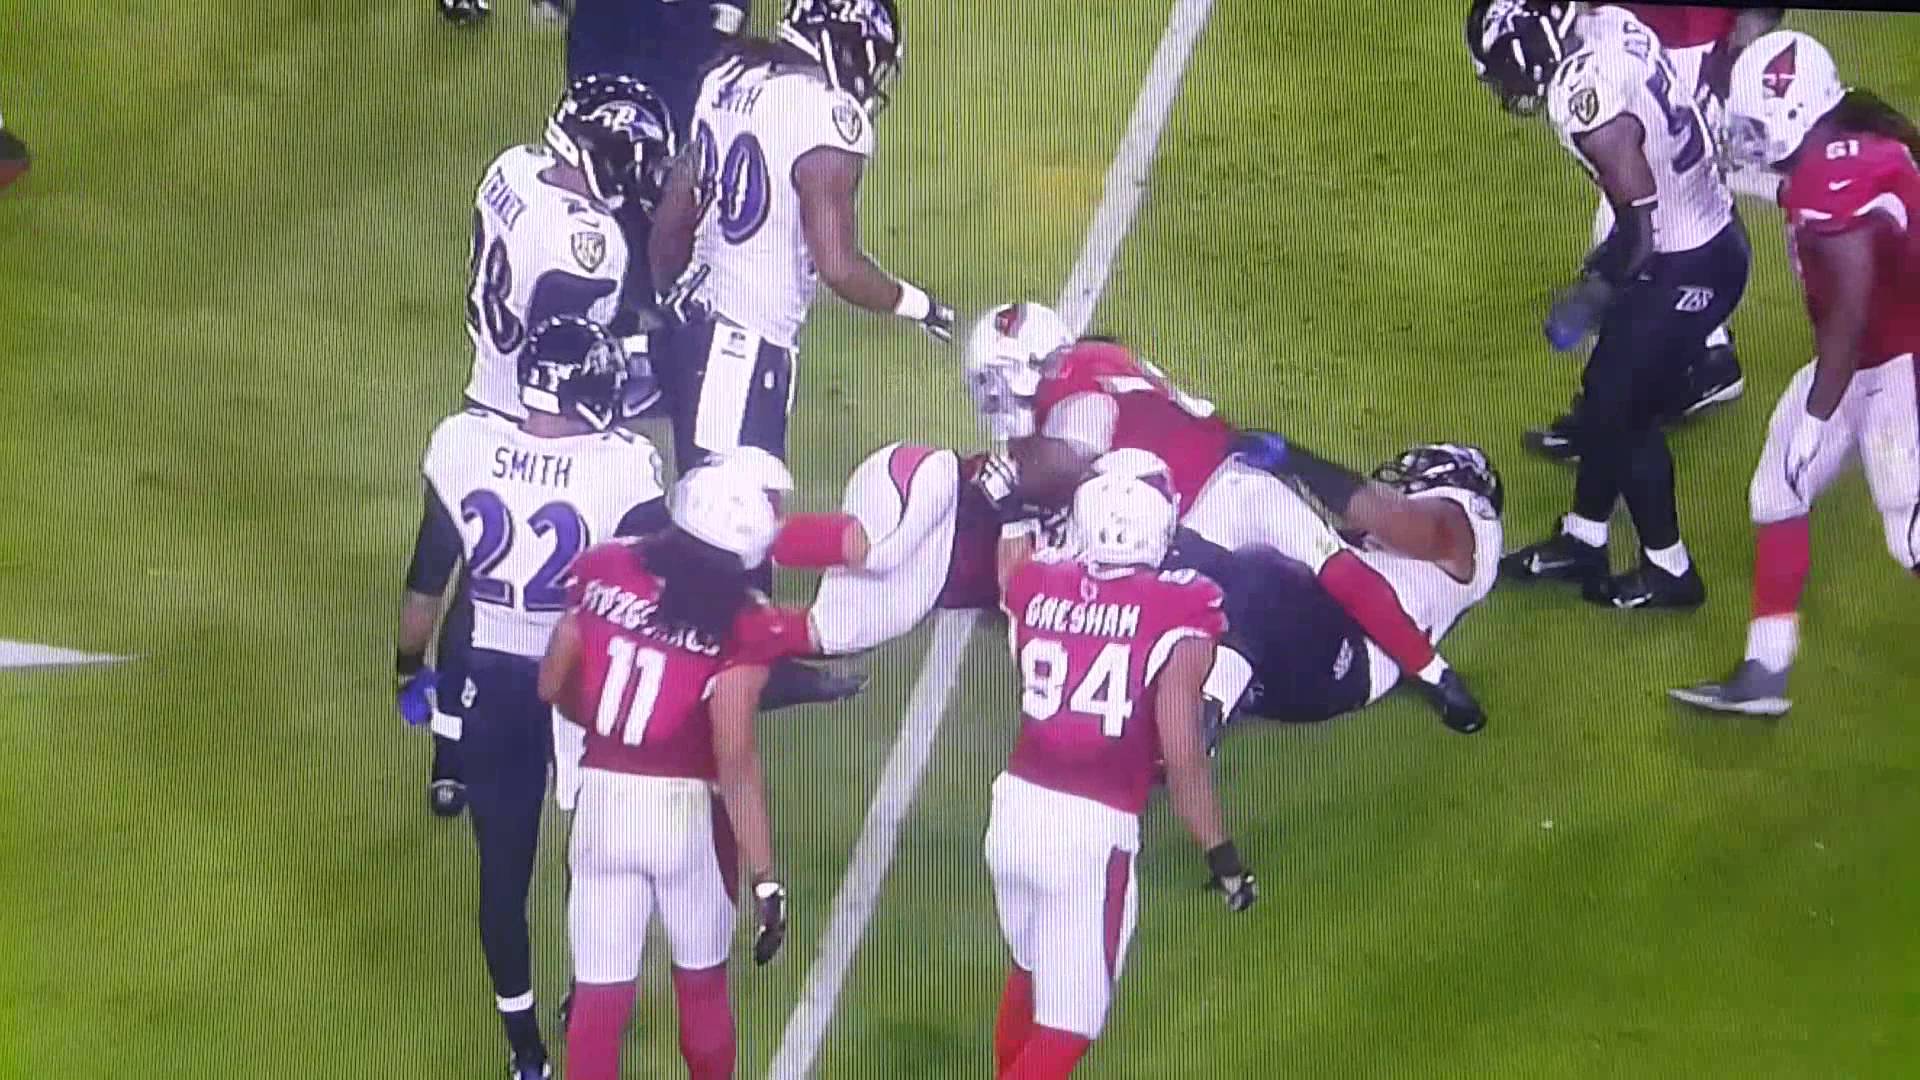 Chris Johnson escapes being down by contact & bursts for 62 yards